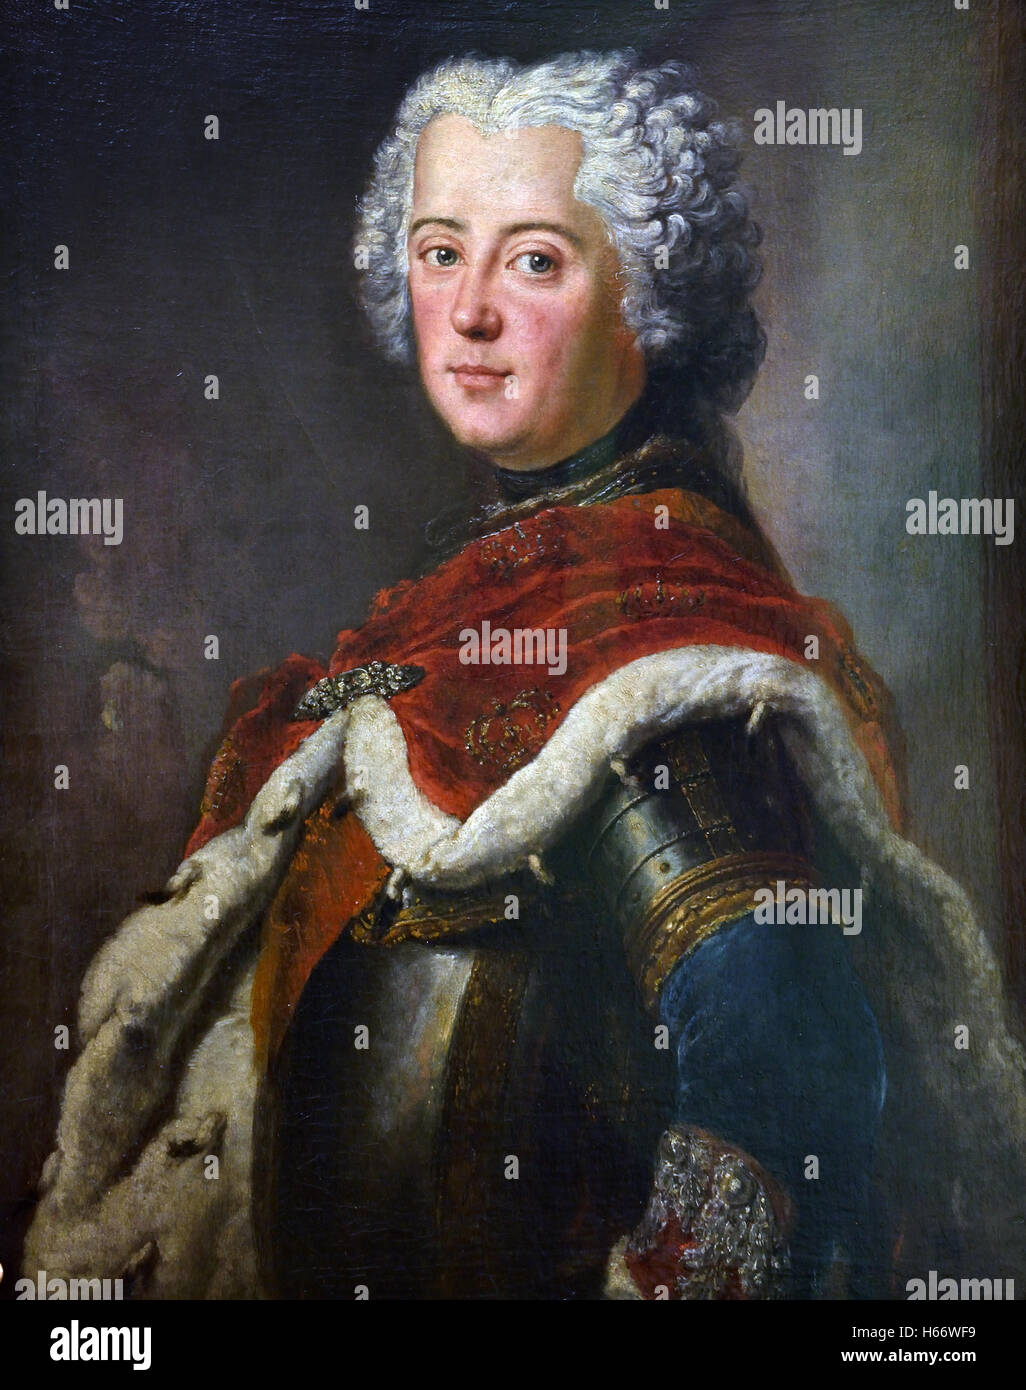 frederick-the-great-1712-1786-as-crown-prince-frederick-ii-was-king